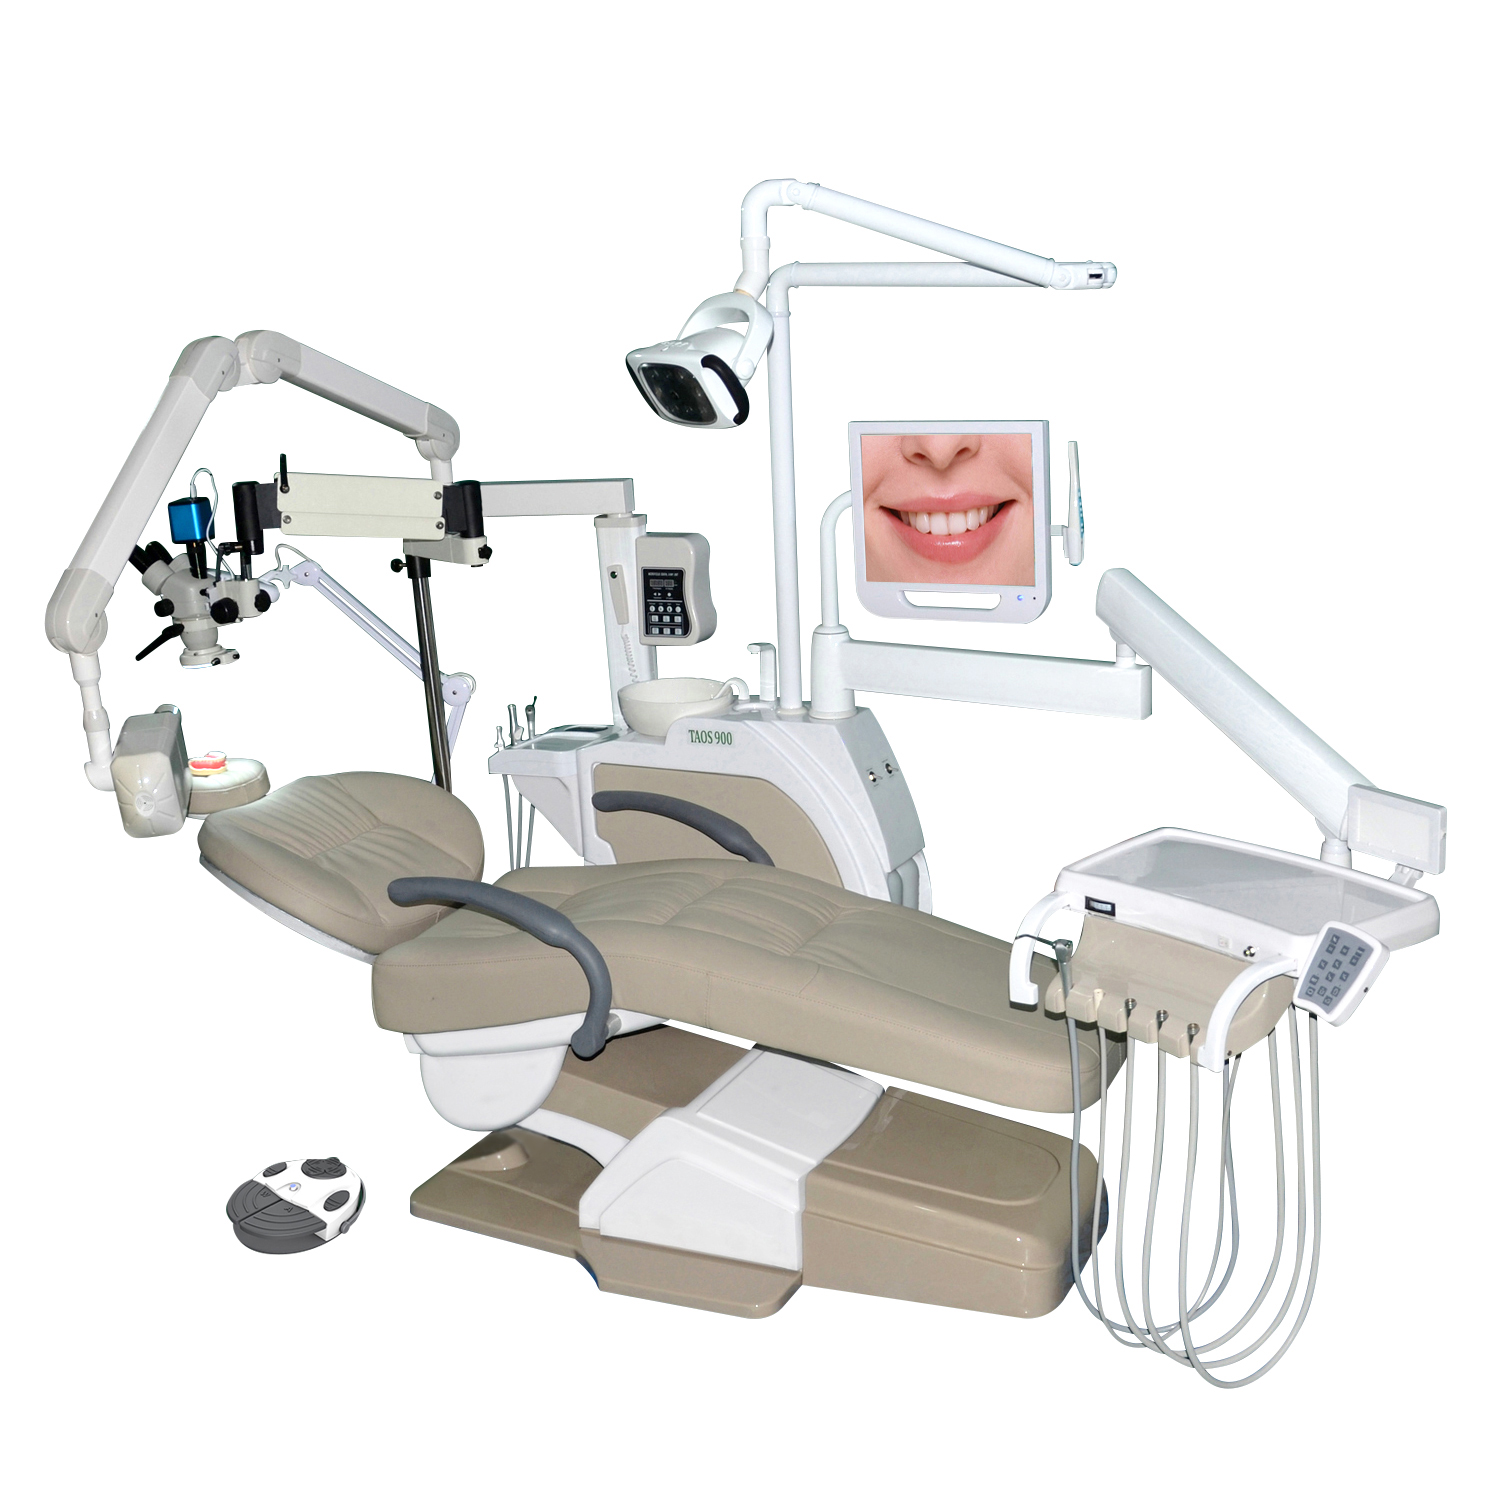 Ergonomic Dental Chair Pricelist –  Dental Chair Central Clinic Unit TAOS900c With Microscope X-Ray – Lingchen